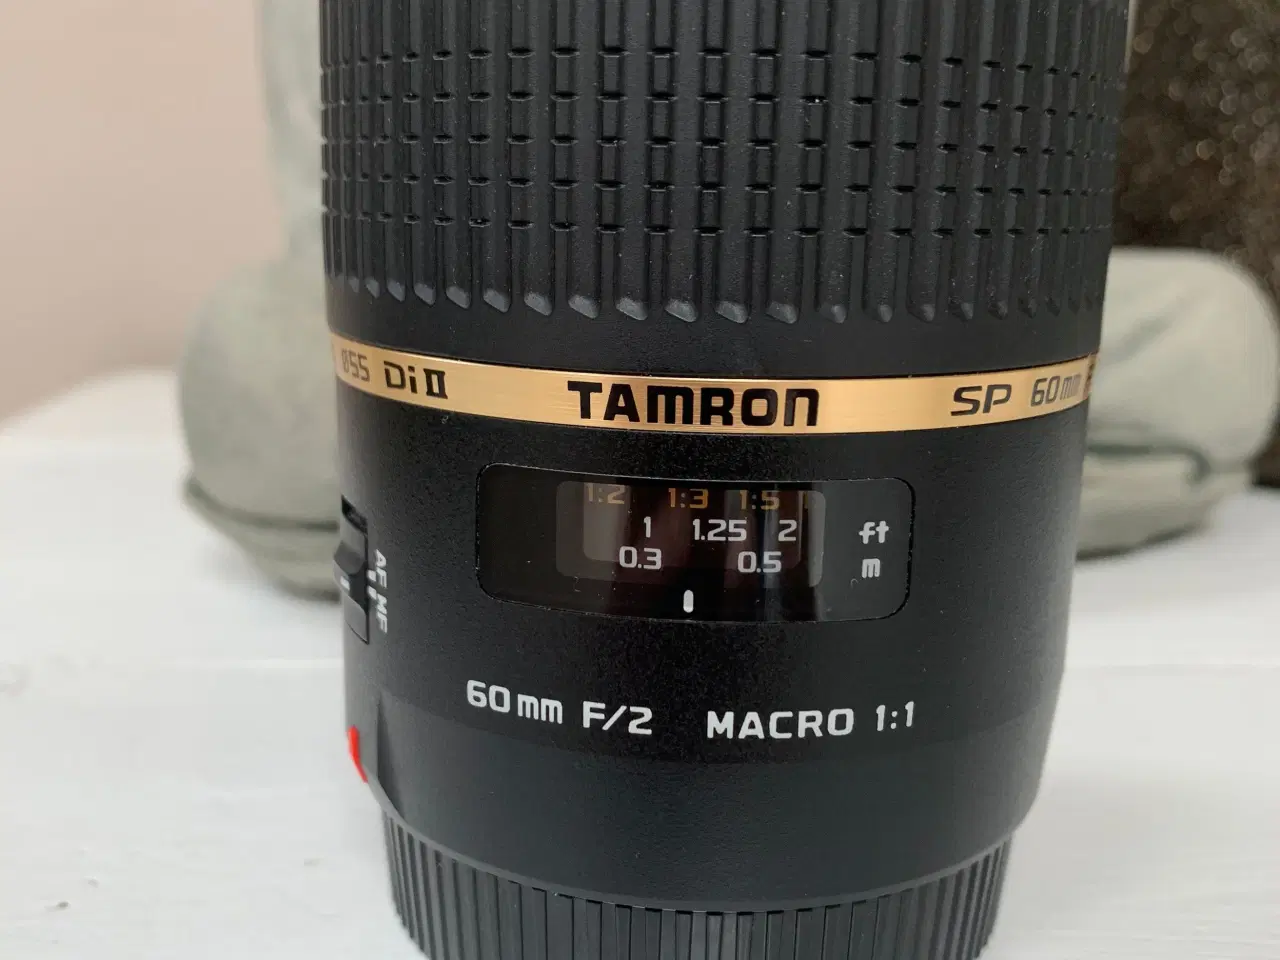 Billede 3 - Tamron 60mm f2 macro 1:1 for canon